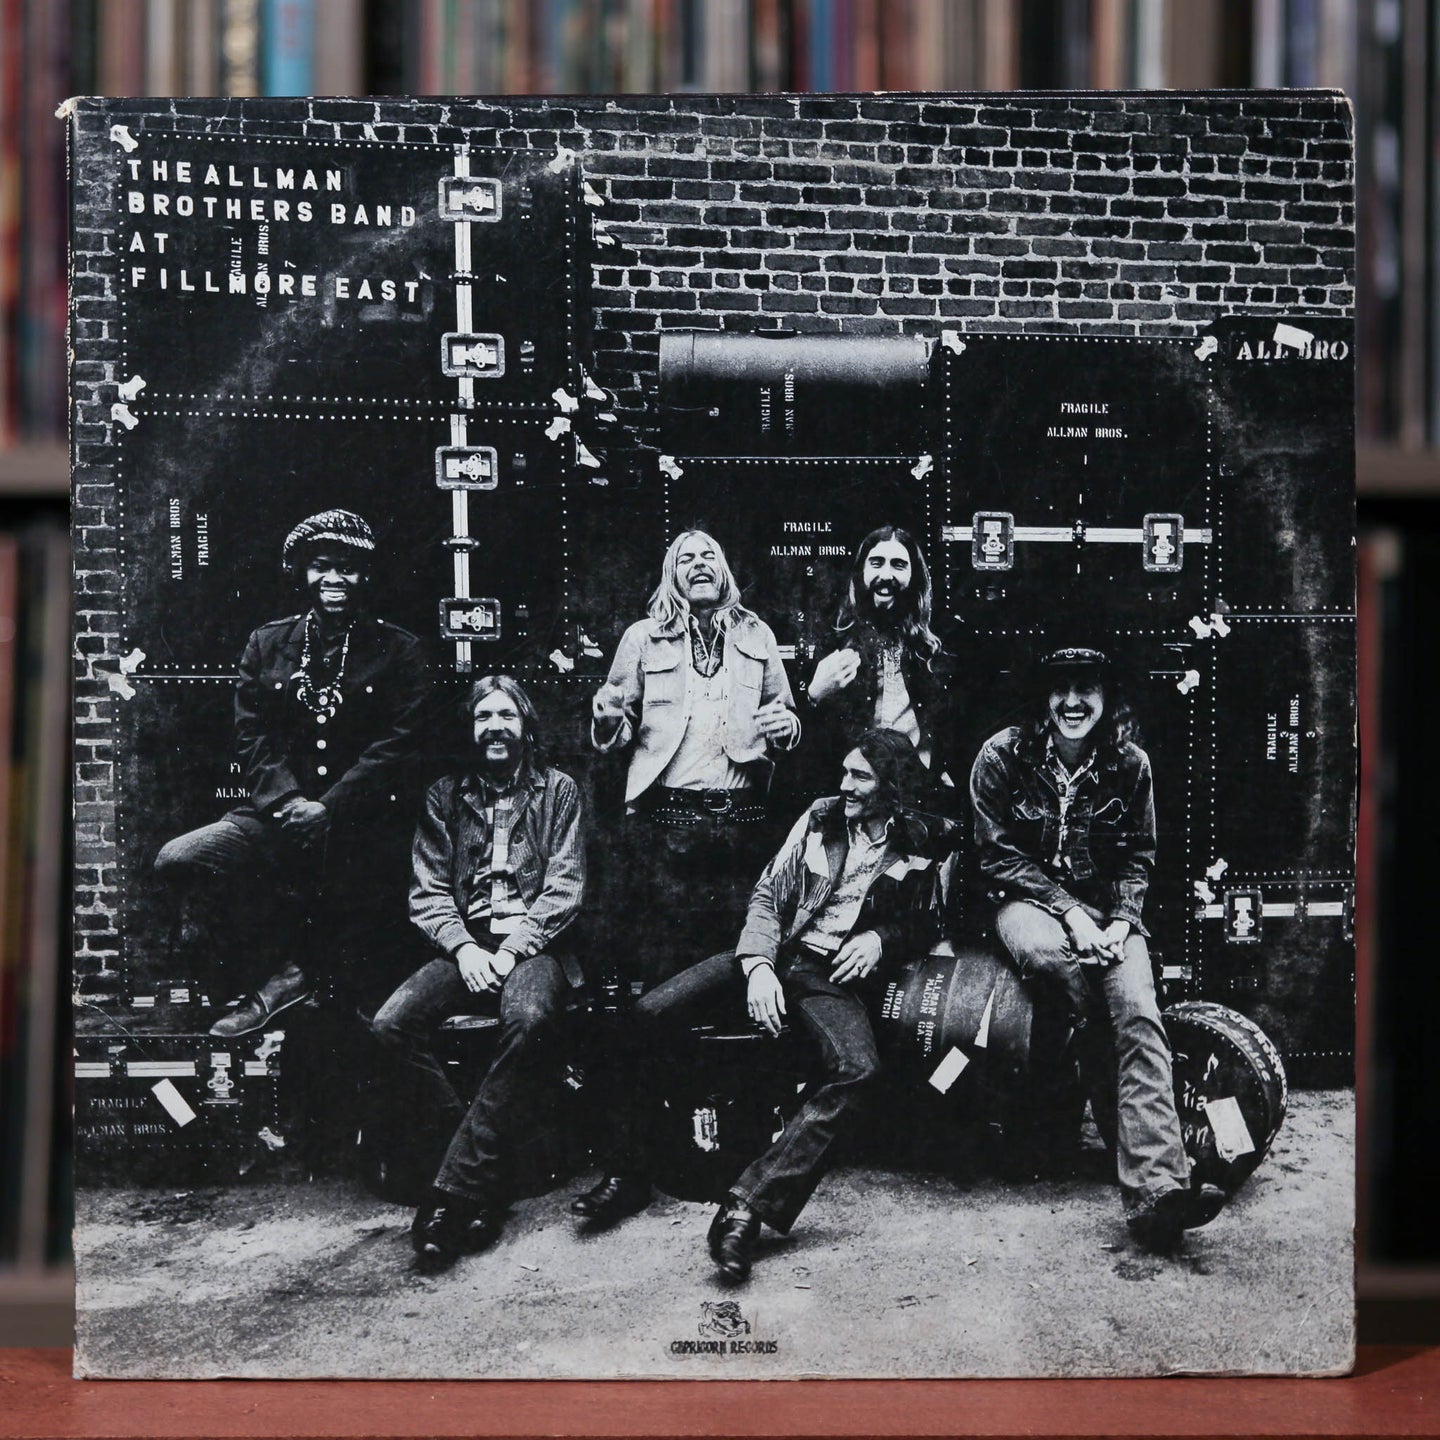 Allman Brothers - The Allman Brothers Band At Fillmore East - 2LP - 1970's Capricorn, VG+/VG